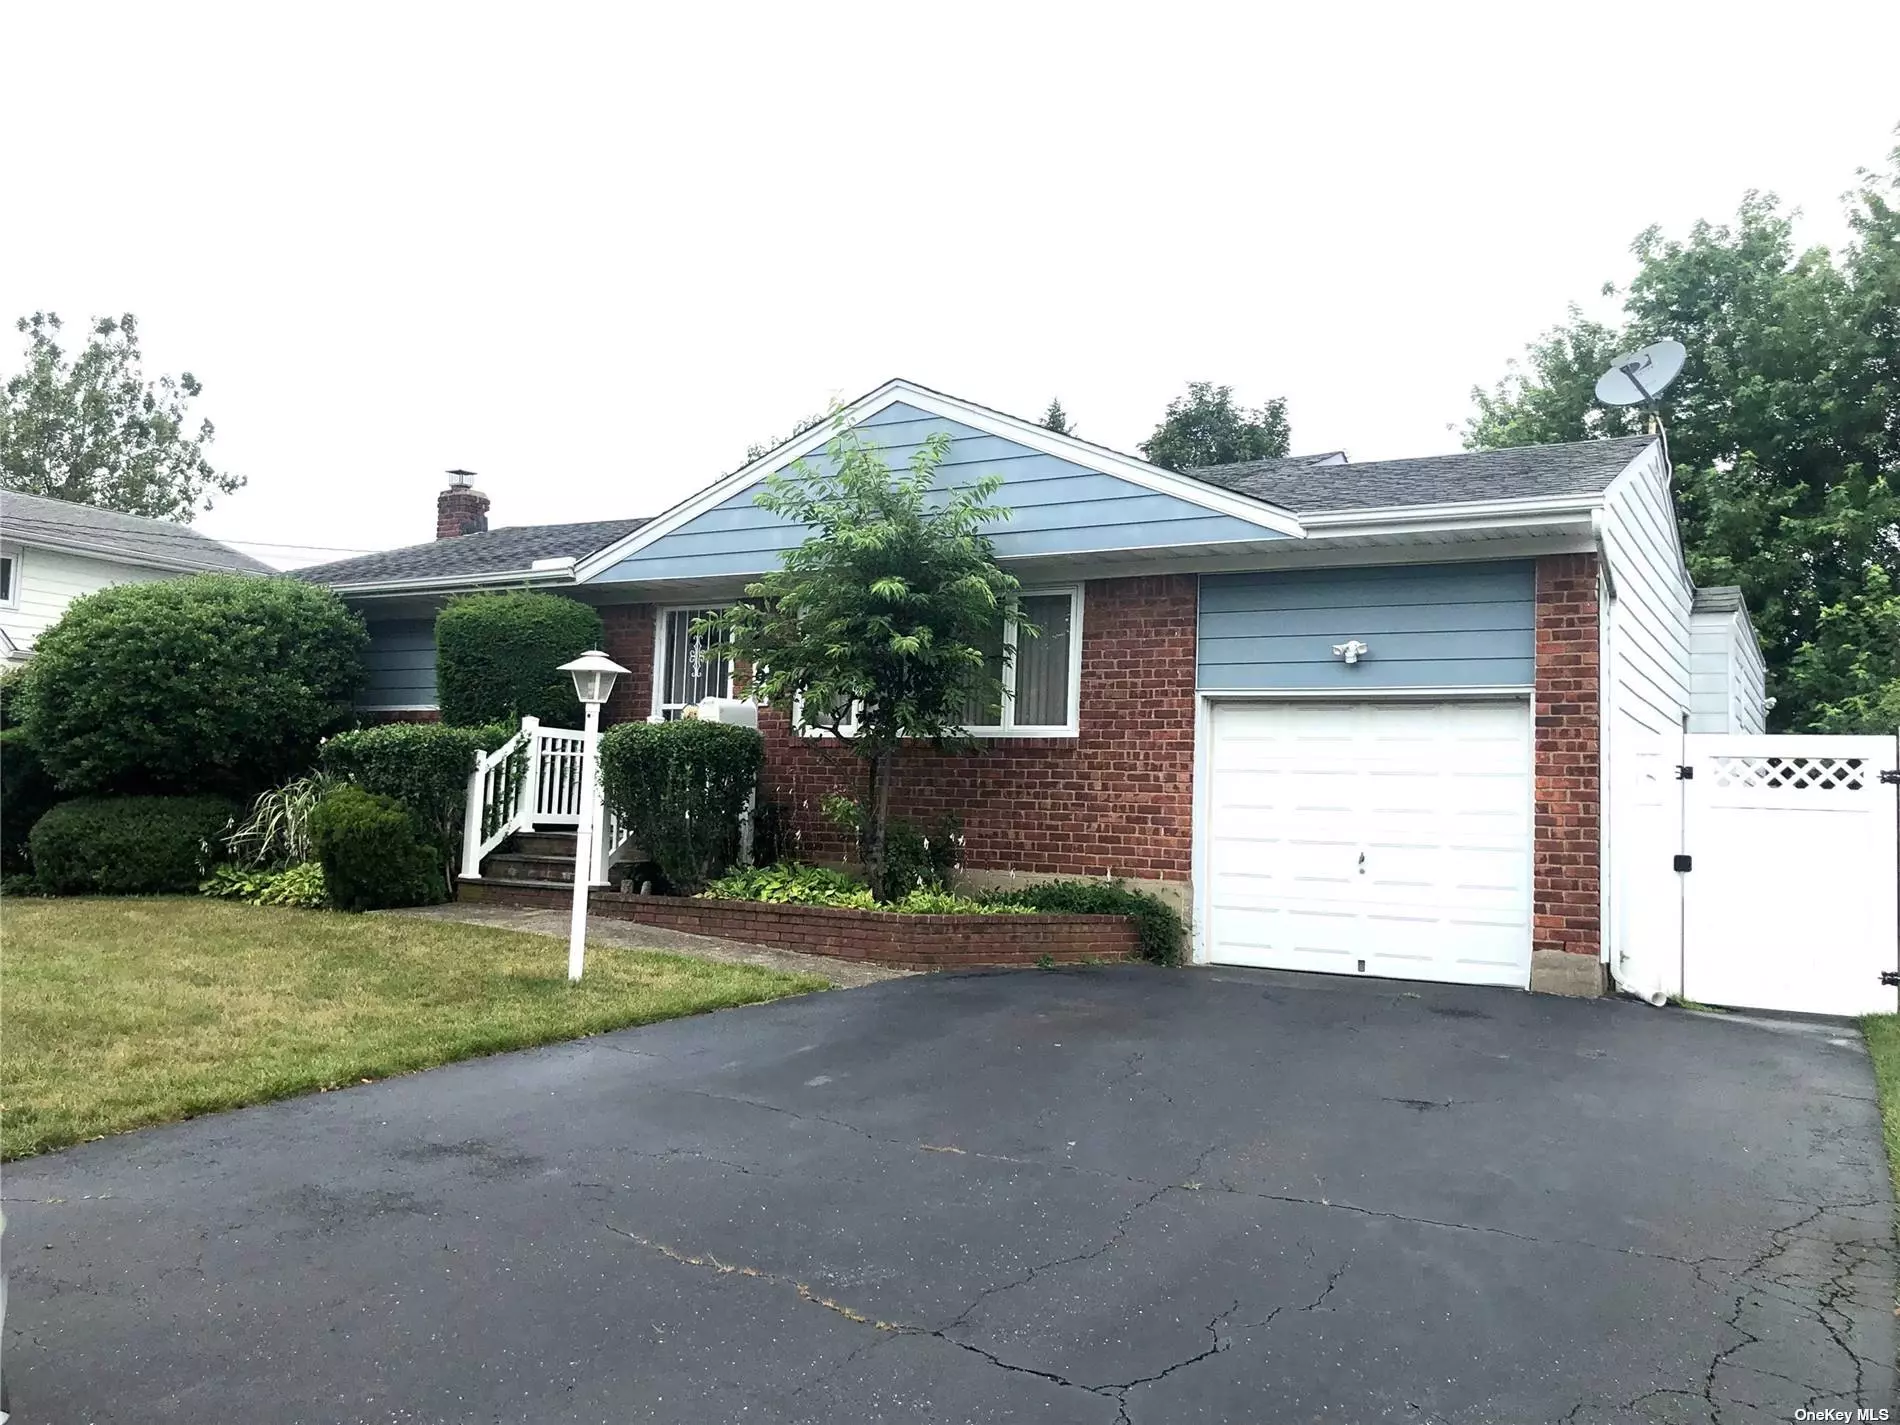 Lovely 4 Bedroom Massapequa Park RANCH, Hardwood Floors , Central AC, Full Basement, Attached Garage. This is the Home You&rsquo;ve Been Waiting For.. Not located in the Village of Massapequa Park, No Village Taxes. Close to Bethpage State Park